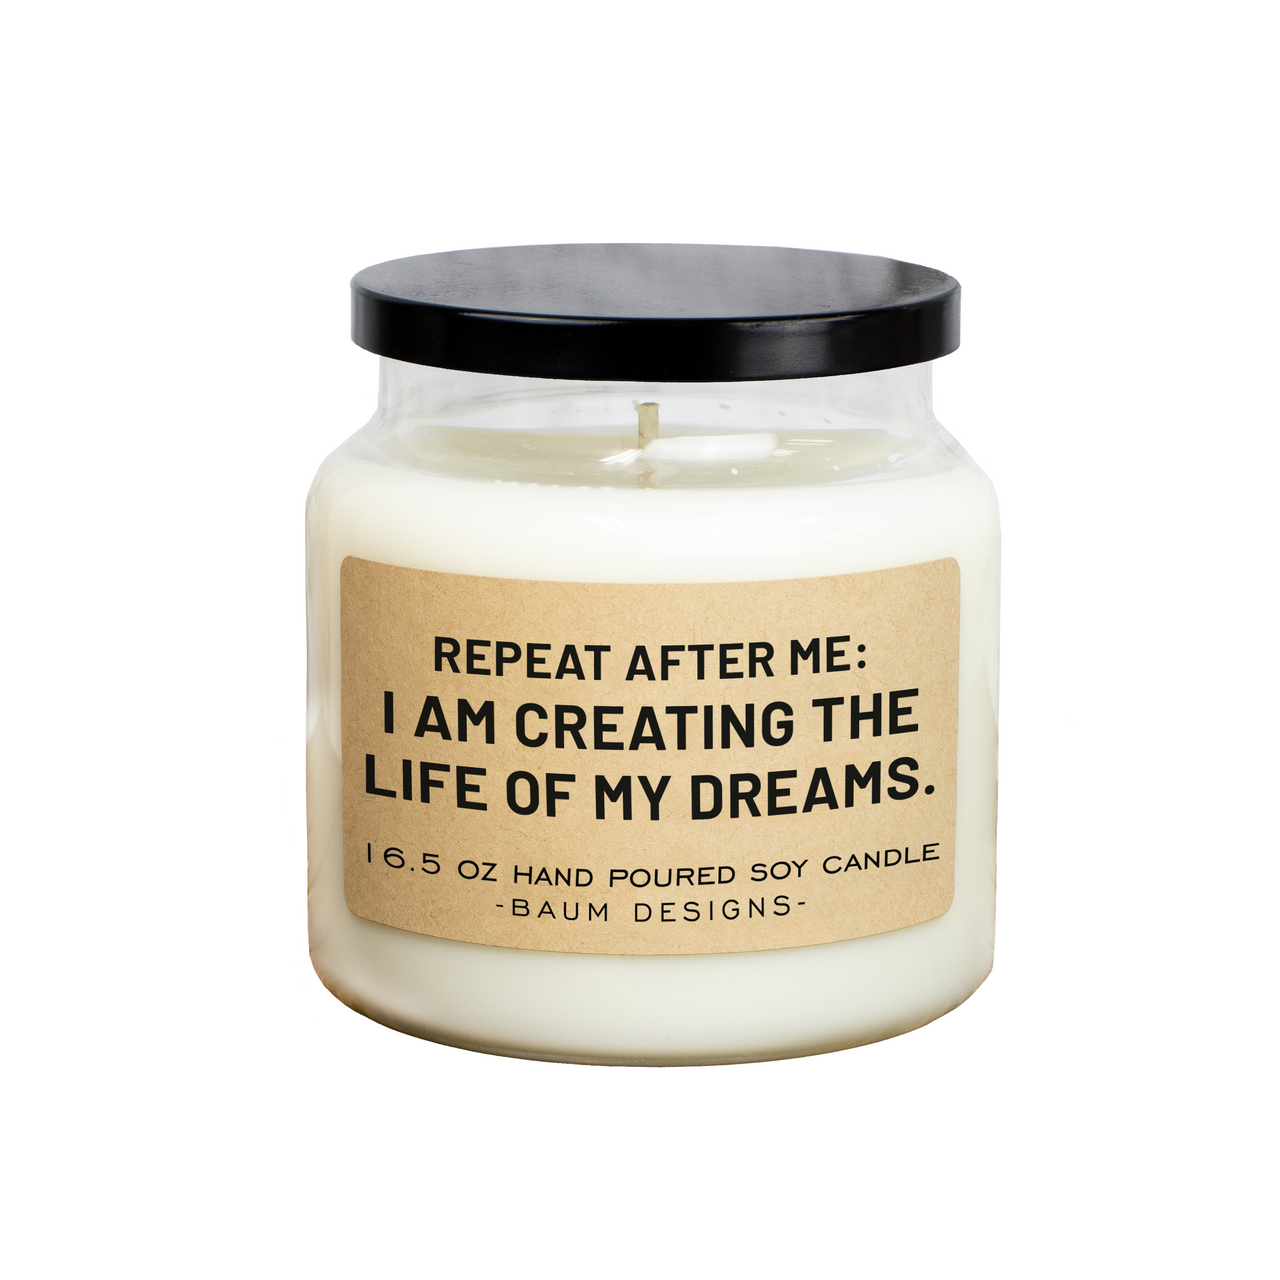 Repeat After Me: I Creating The Life Of My Dreams Soy Candle Baum Designs